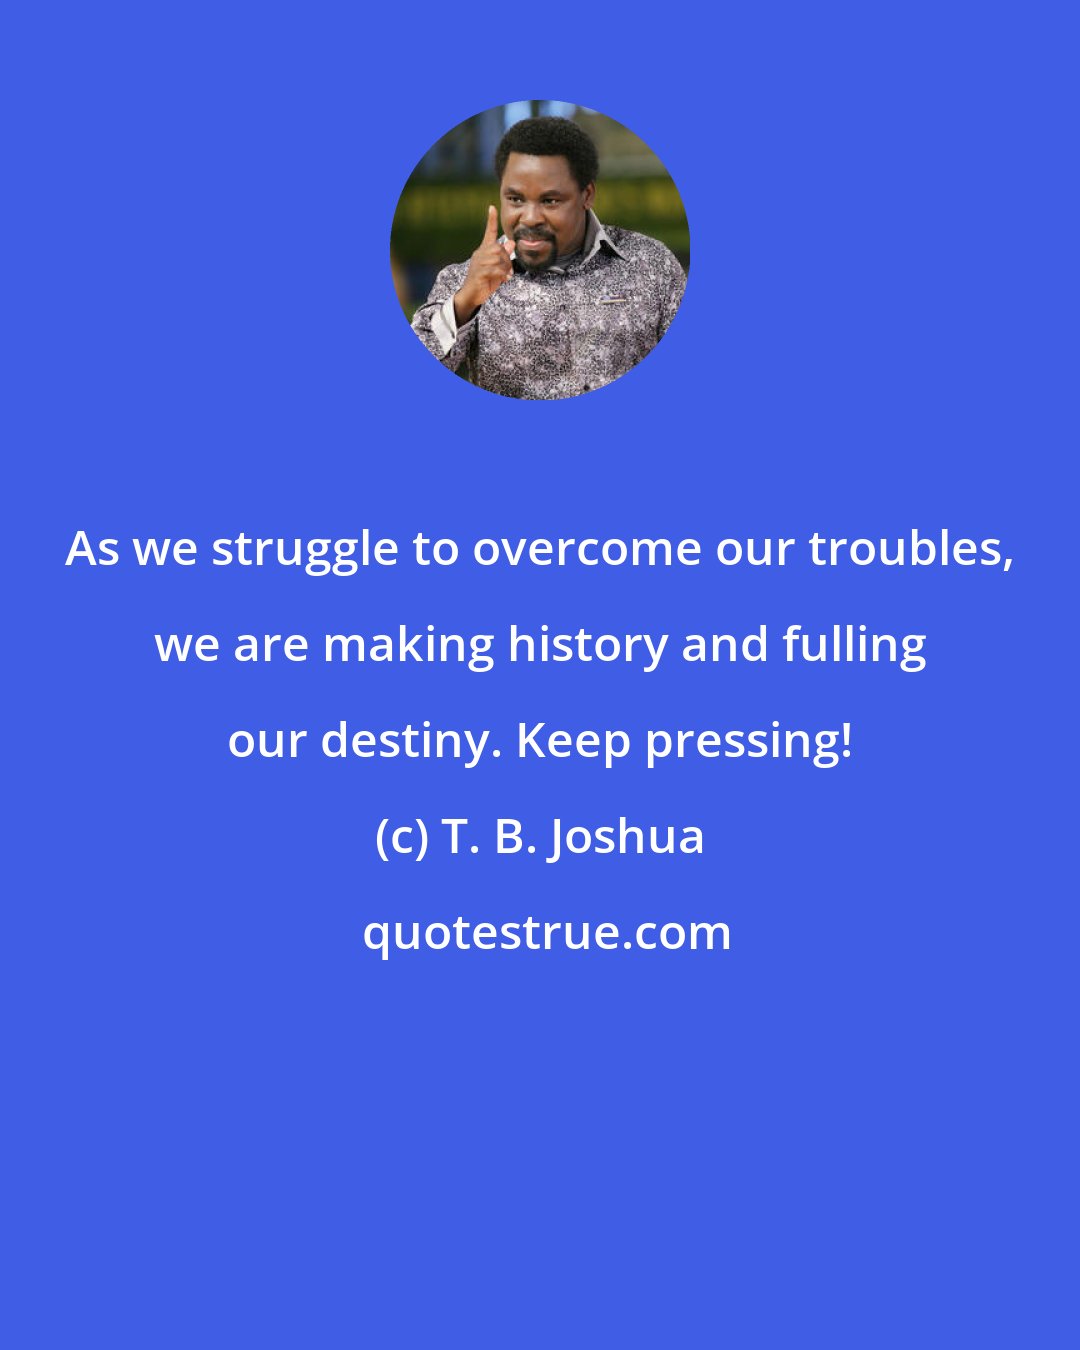 T. B. Joshua: As we struggle to overcome our troubles, we are making history and fulling our destiny. Keep pressing!